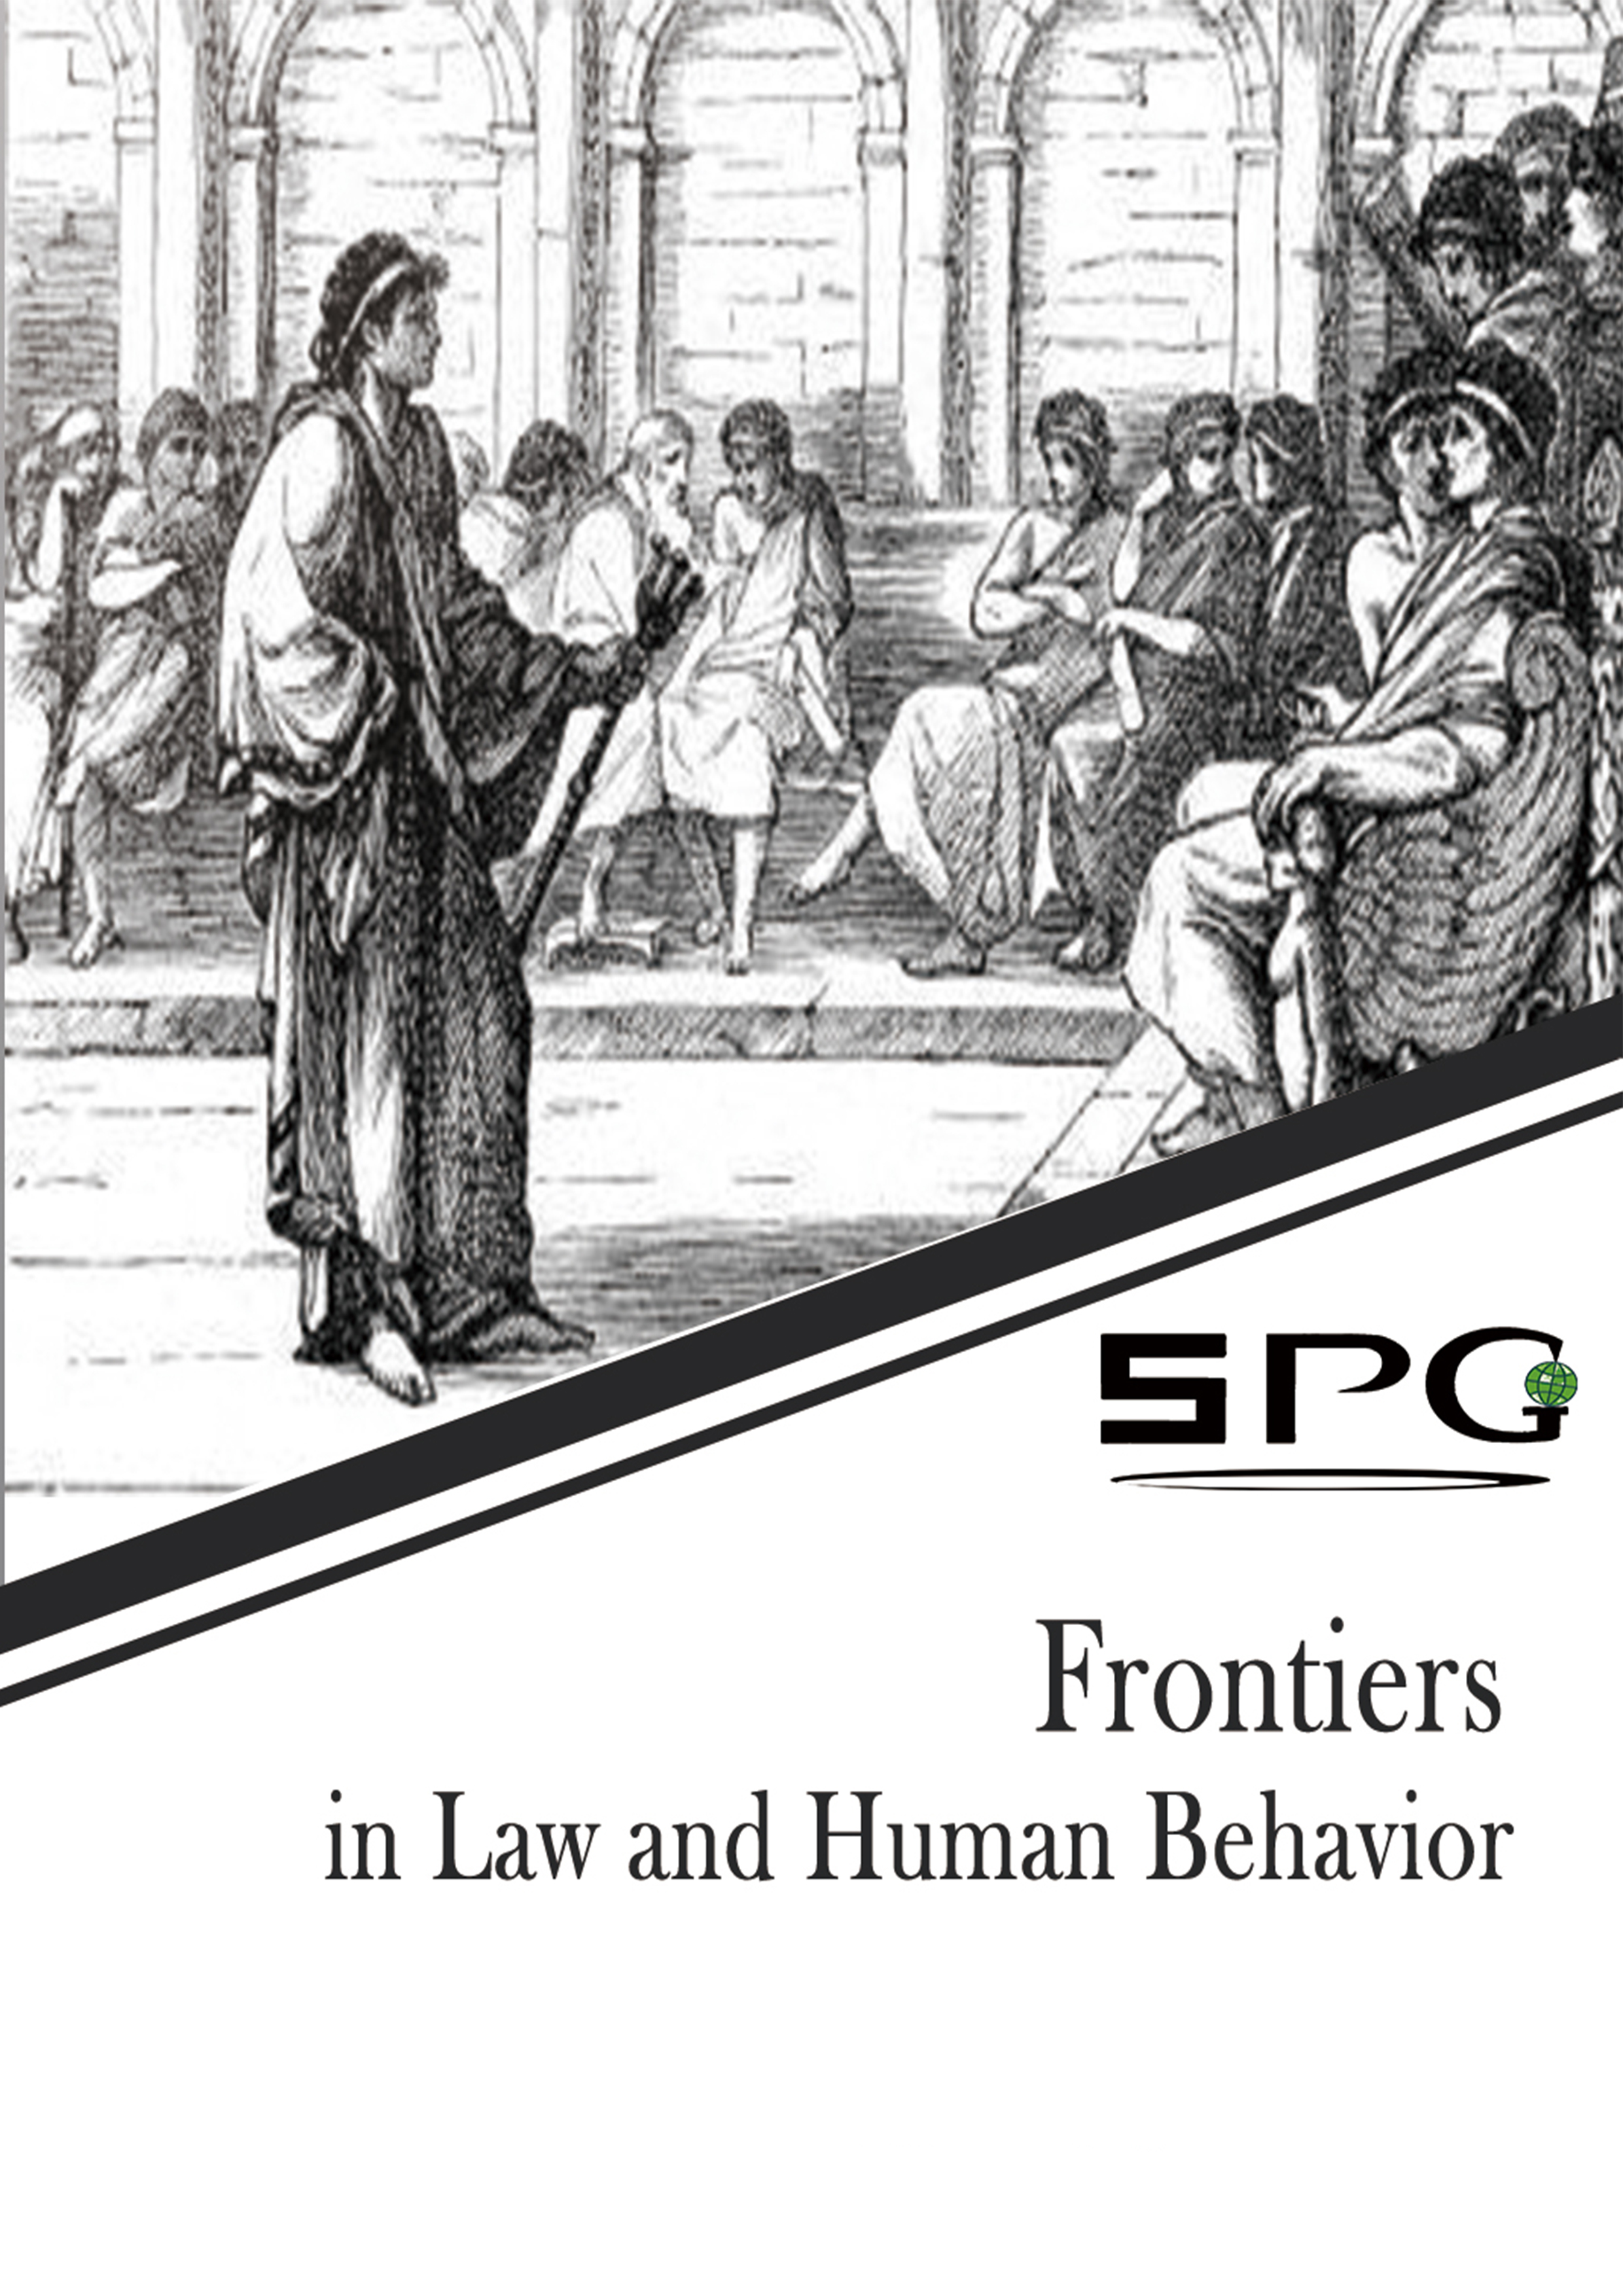 Frontiers in Law and Human Behavior | Scholar Publishing Group